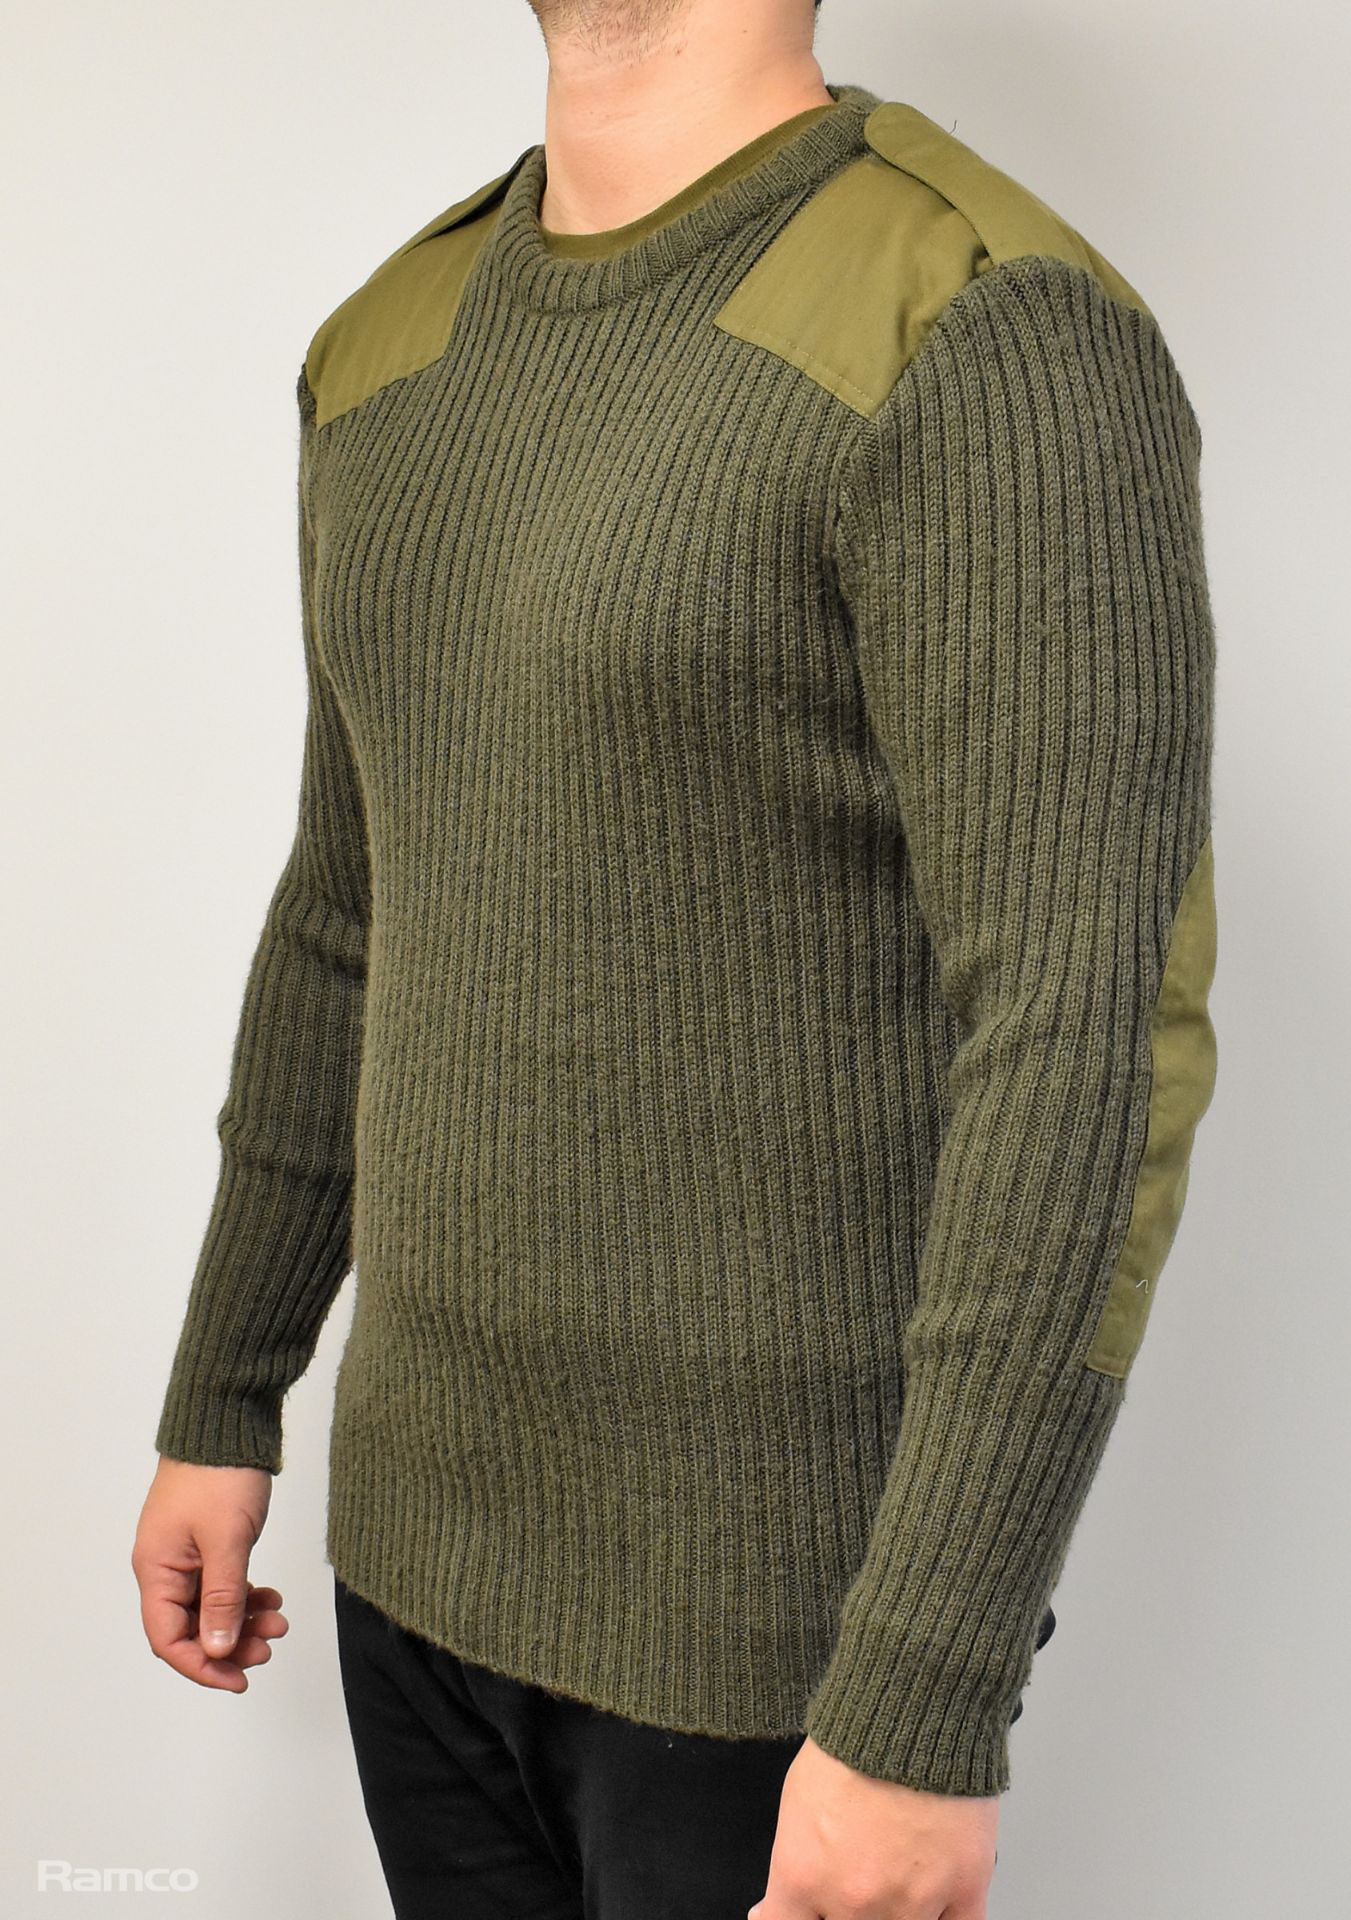 60x British Army wool jerseys - Olive - mixed grades and sizes - Image 2 of 10